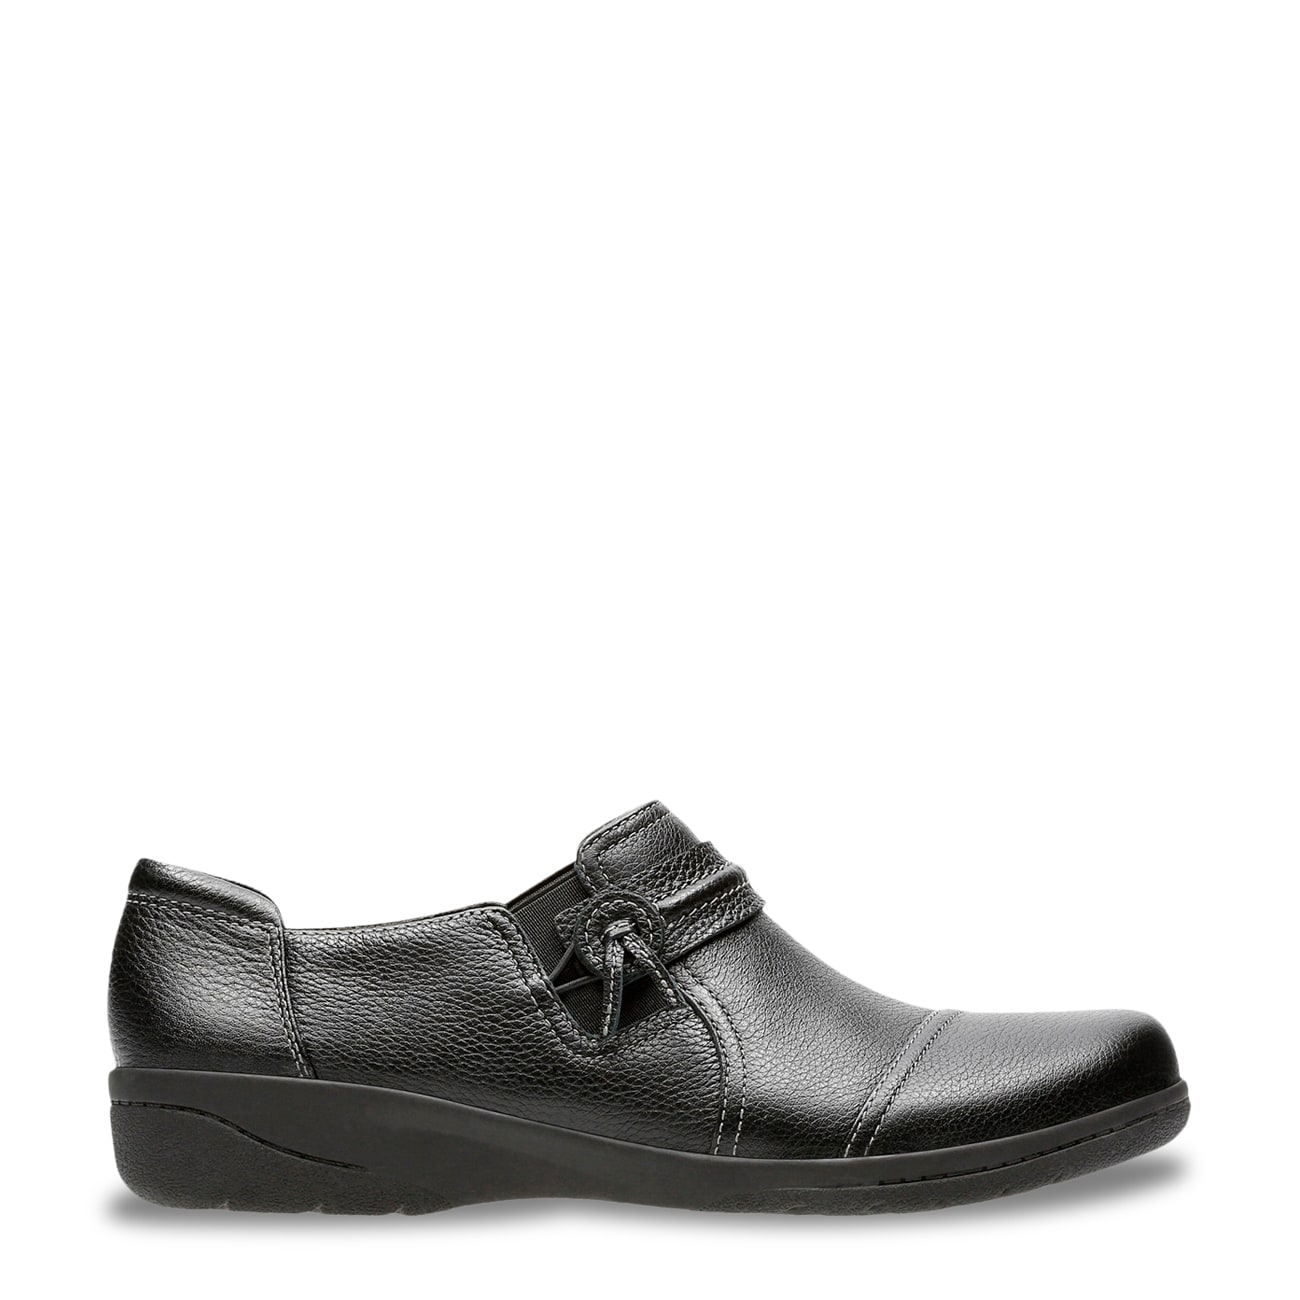 clarks shoes canada online shopping